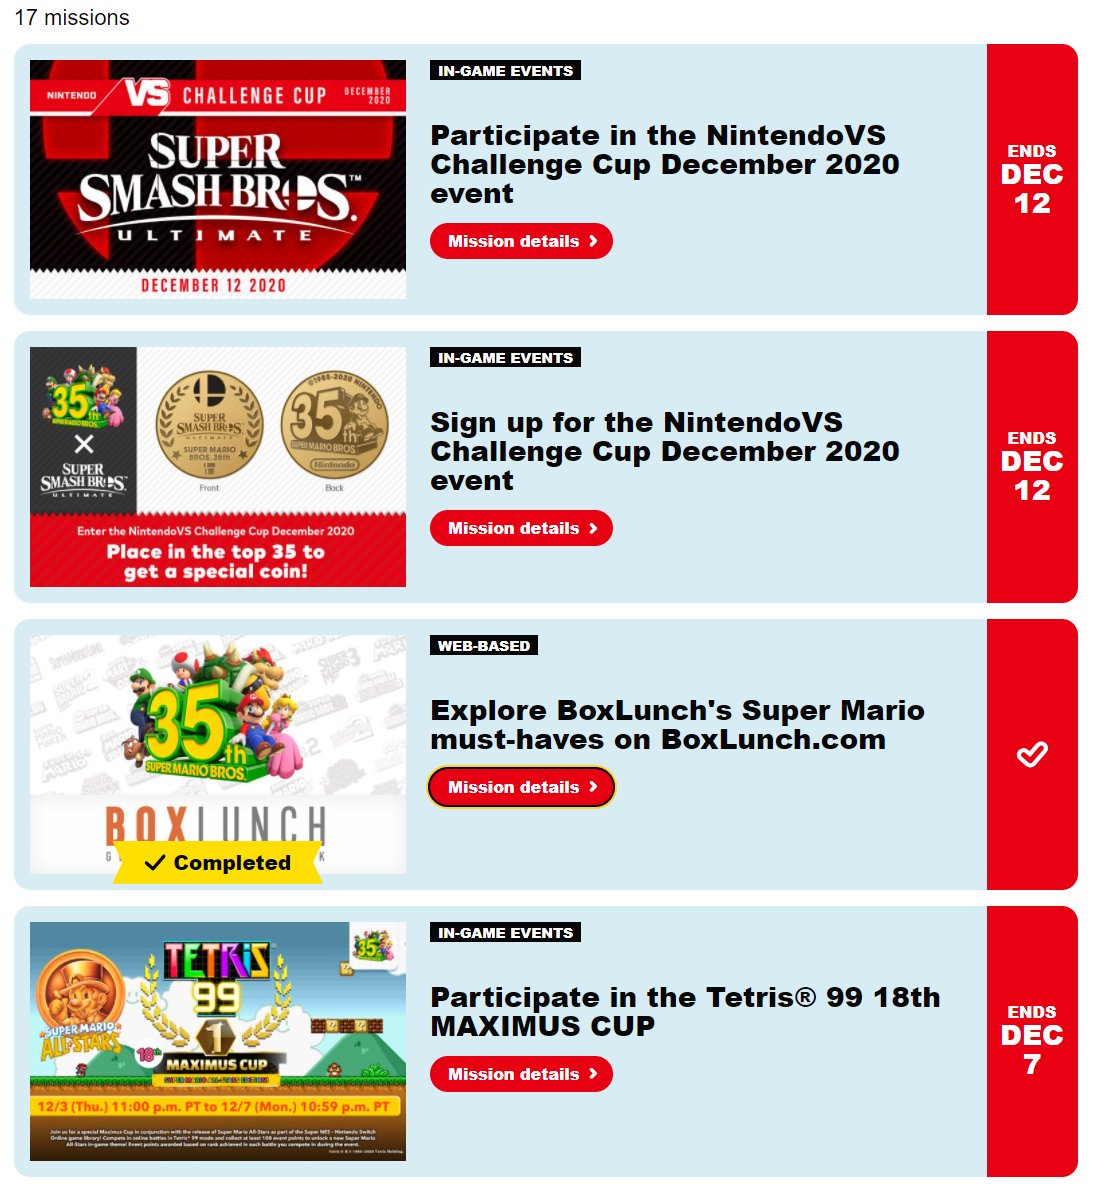 Nintendeal A Bunch Of New My Nintendo Missions Are Up Including Explore Boxlunch S Super Mario Must Haves Click Here To Complete The Mission T Co Qvkr98can7 T Co Jklu2mphhi Twitter